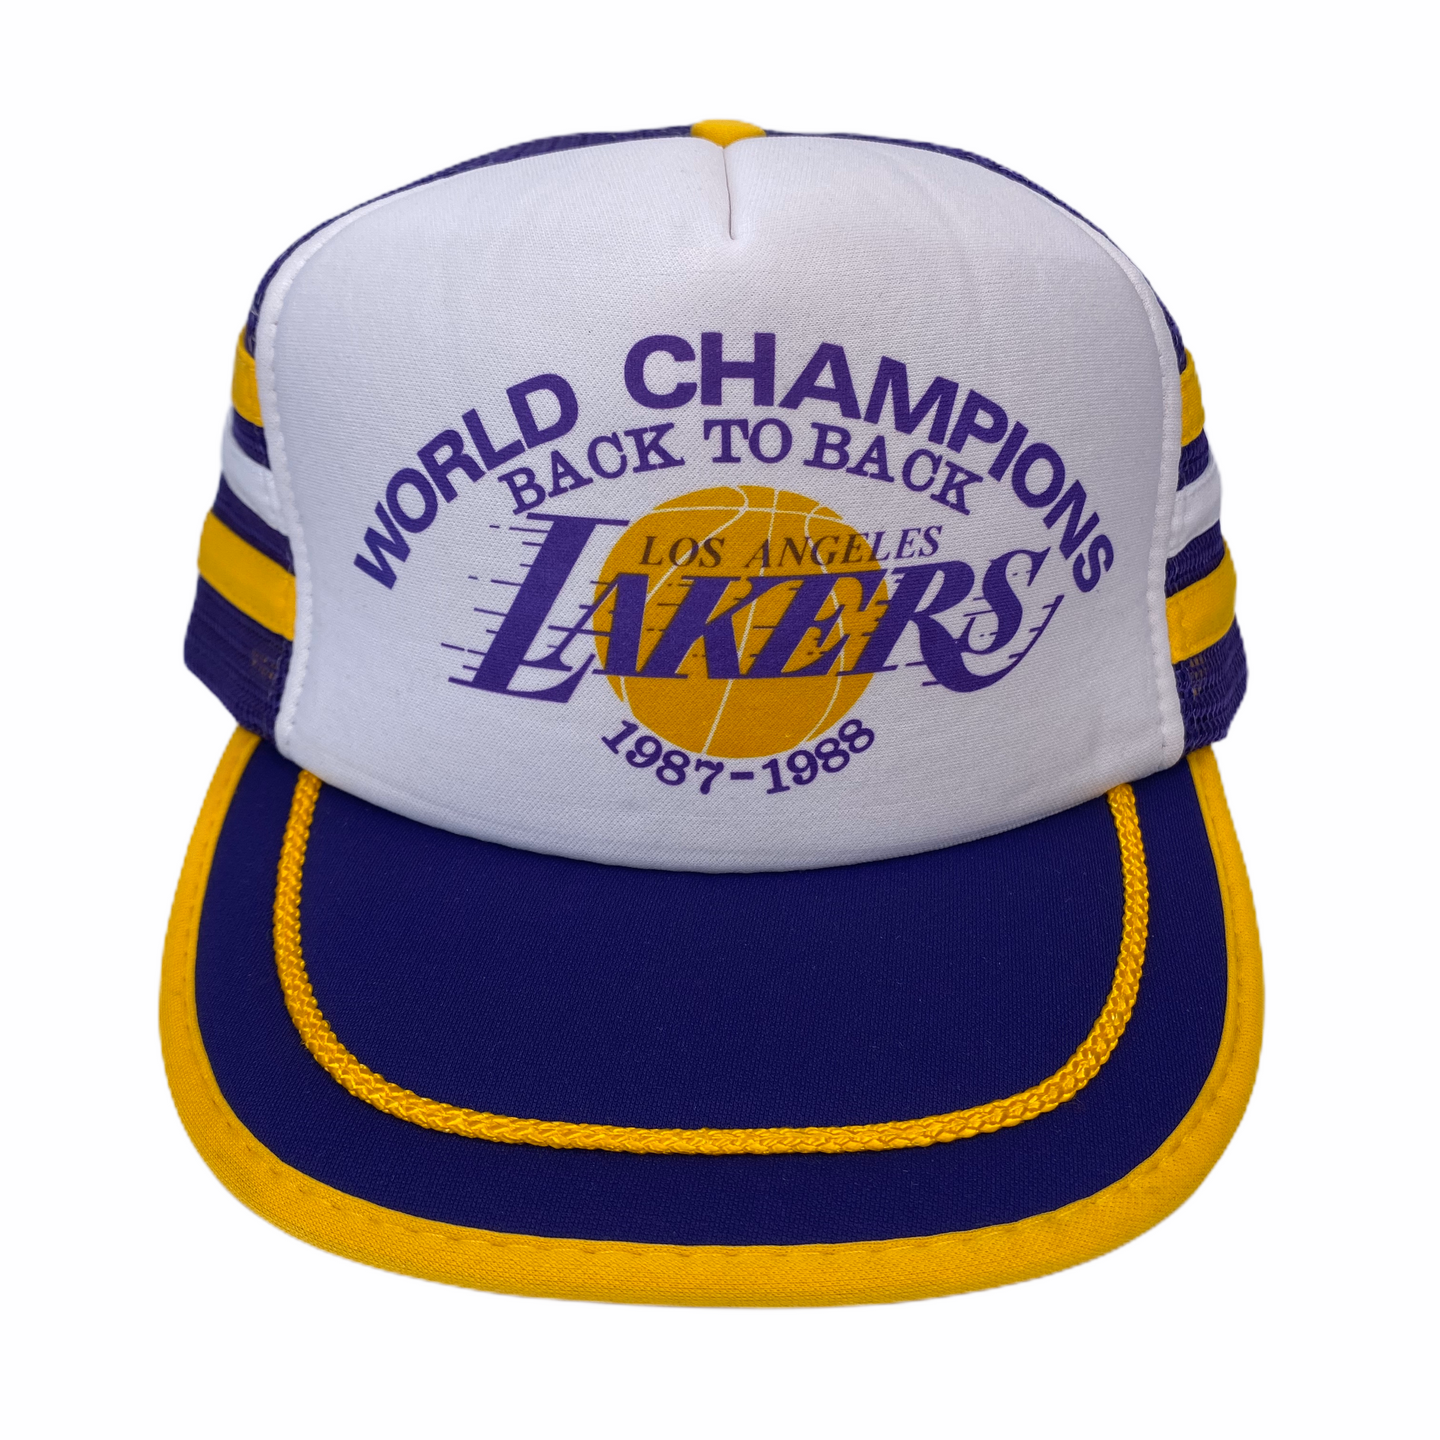 Vintage 1987-88 Los Angeles Lakers Back-to-Back Champions Snapback